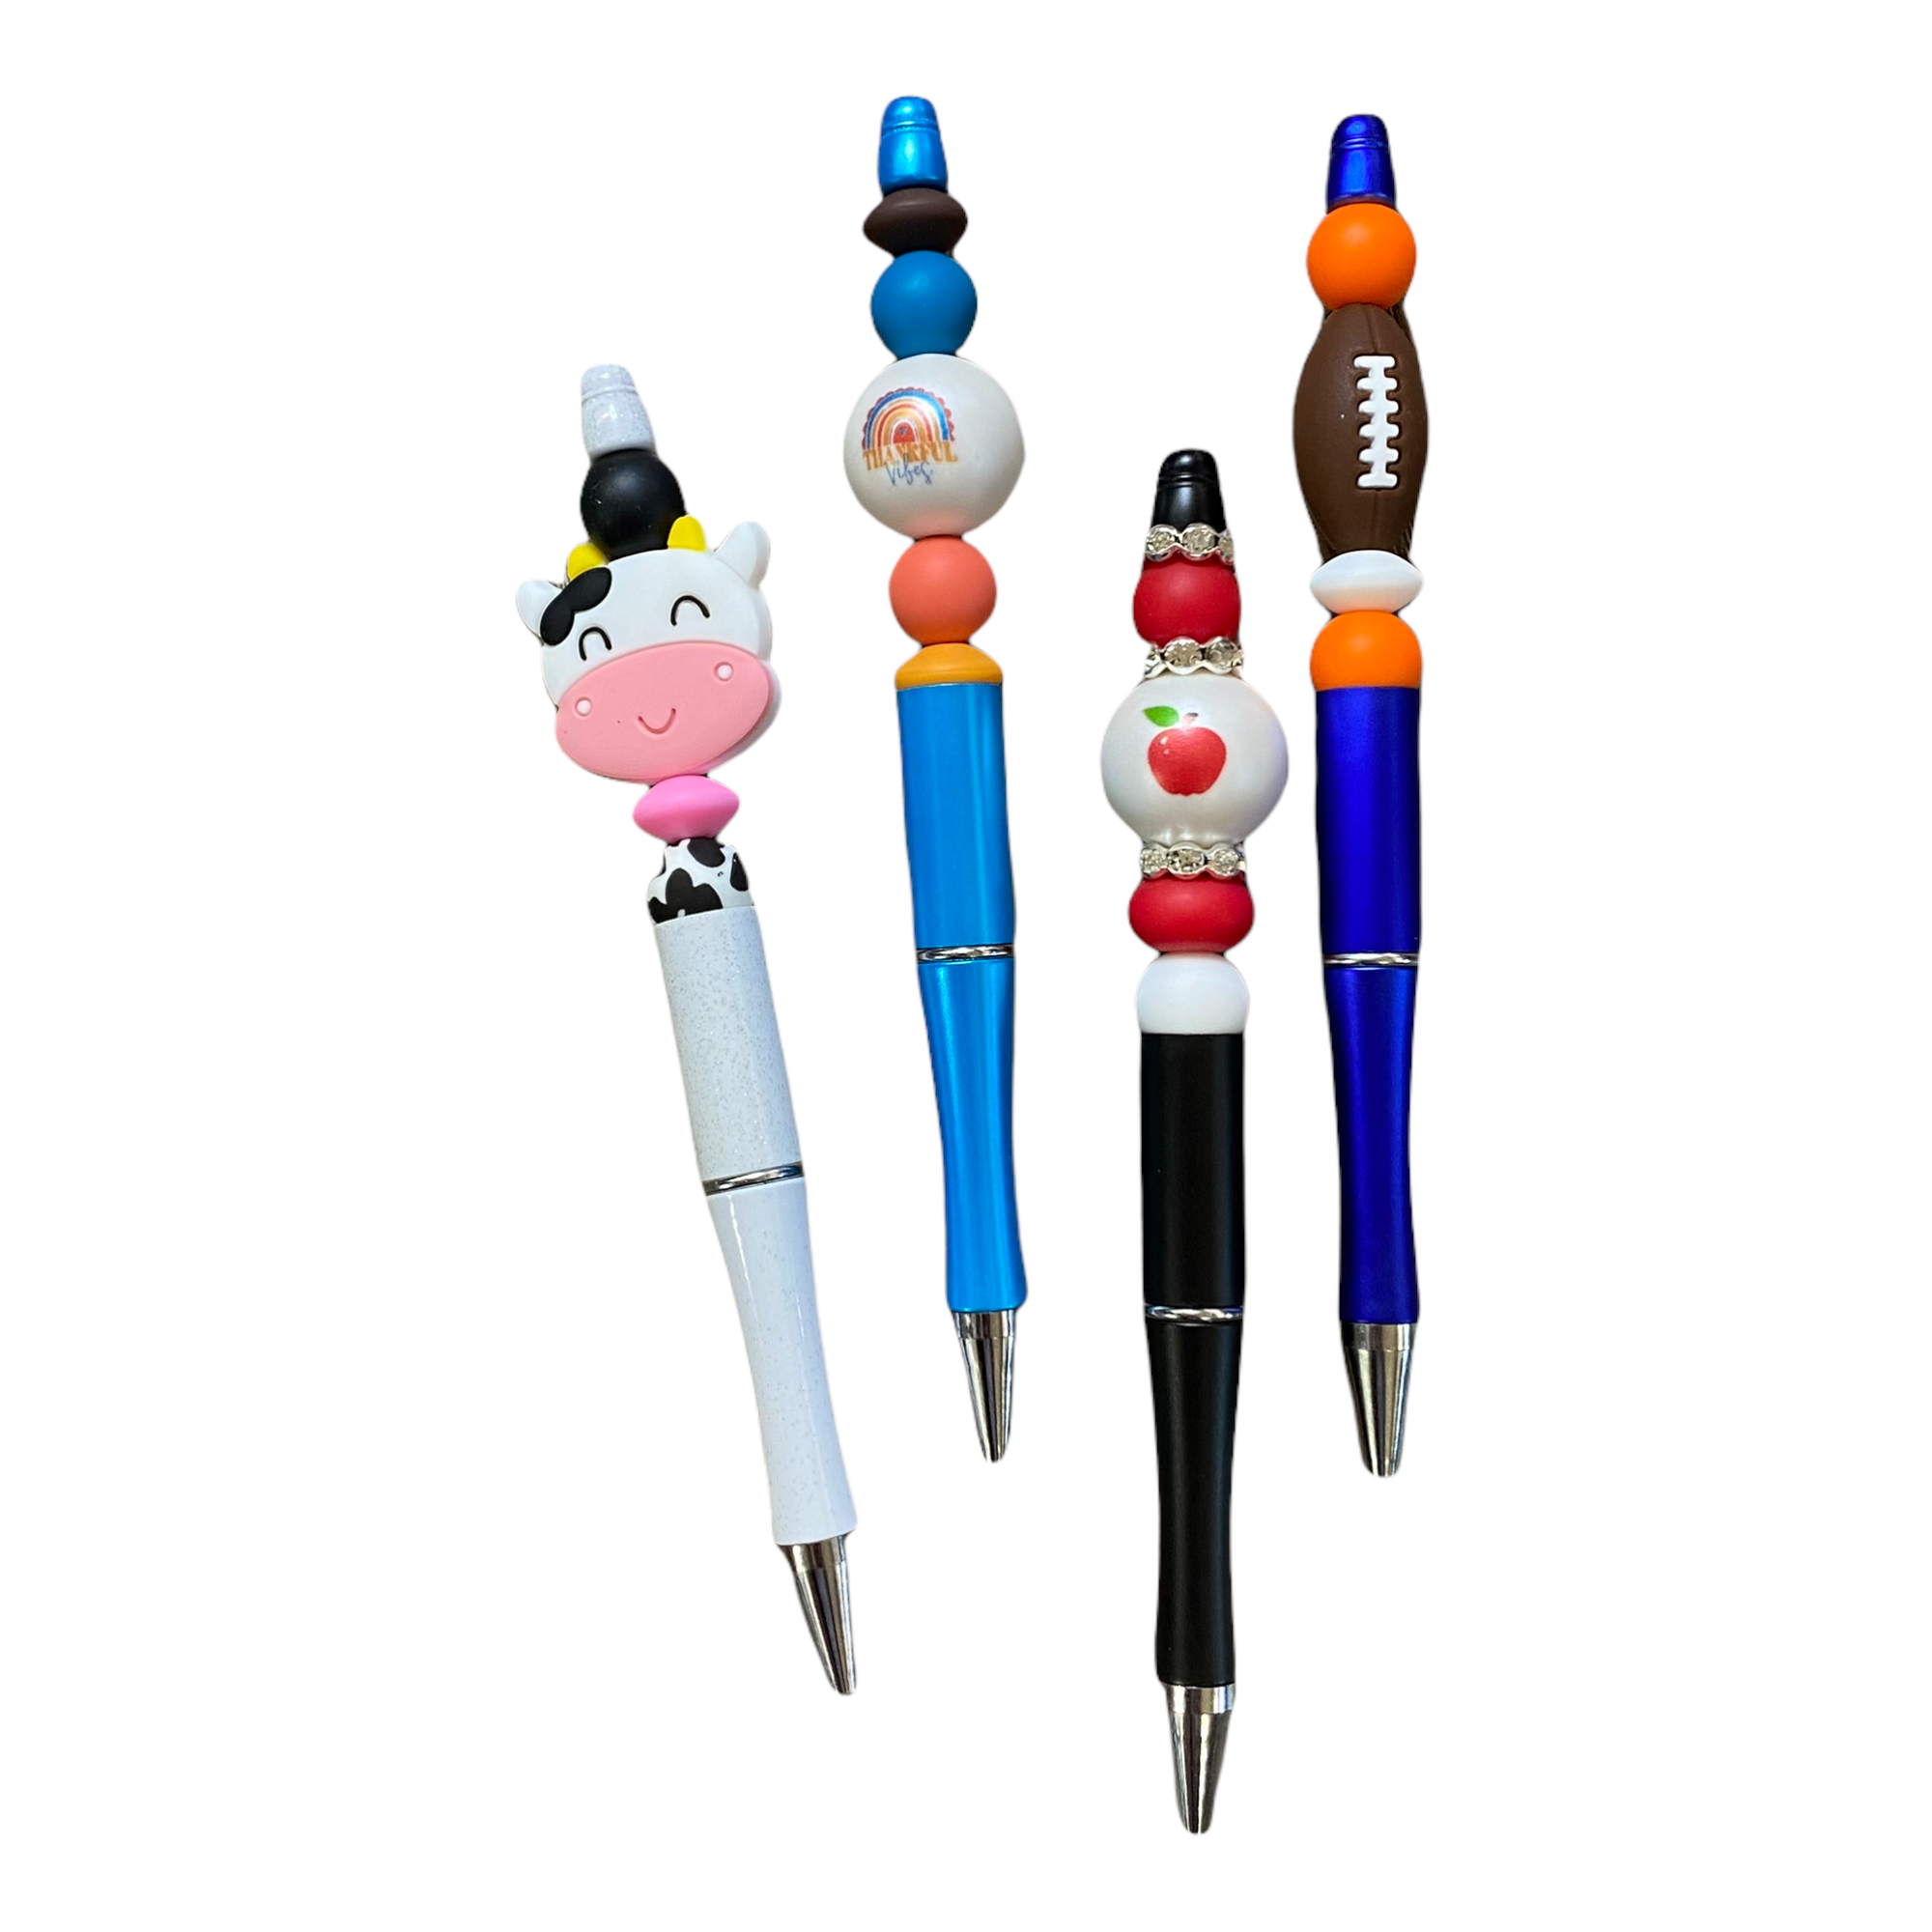 How to Make a Beadable Pen with chunky acrylic or silicone beads 